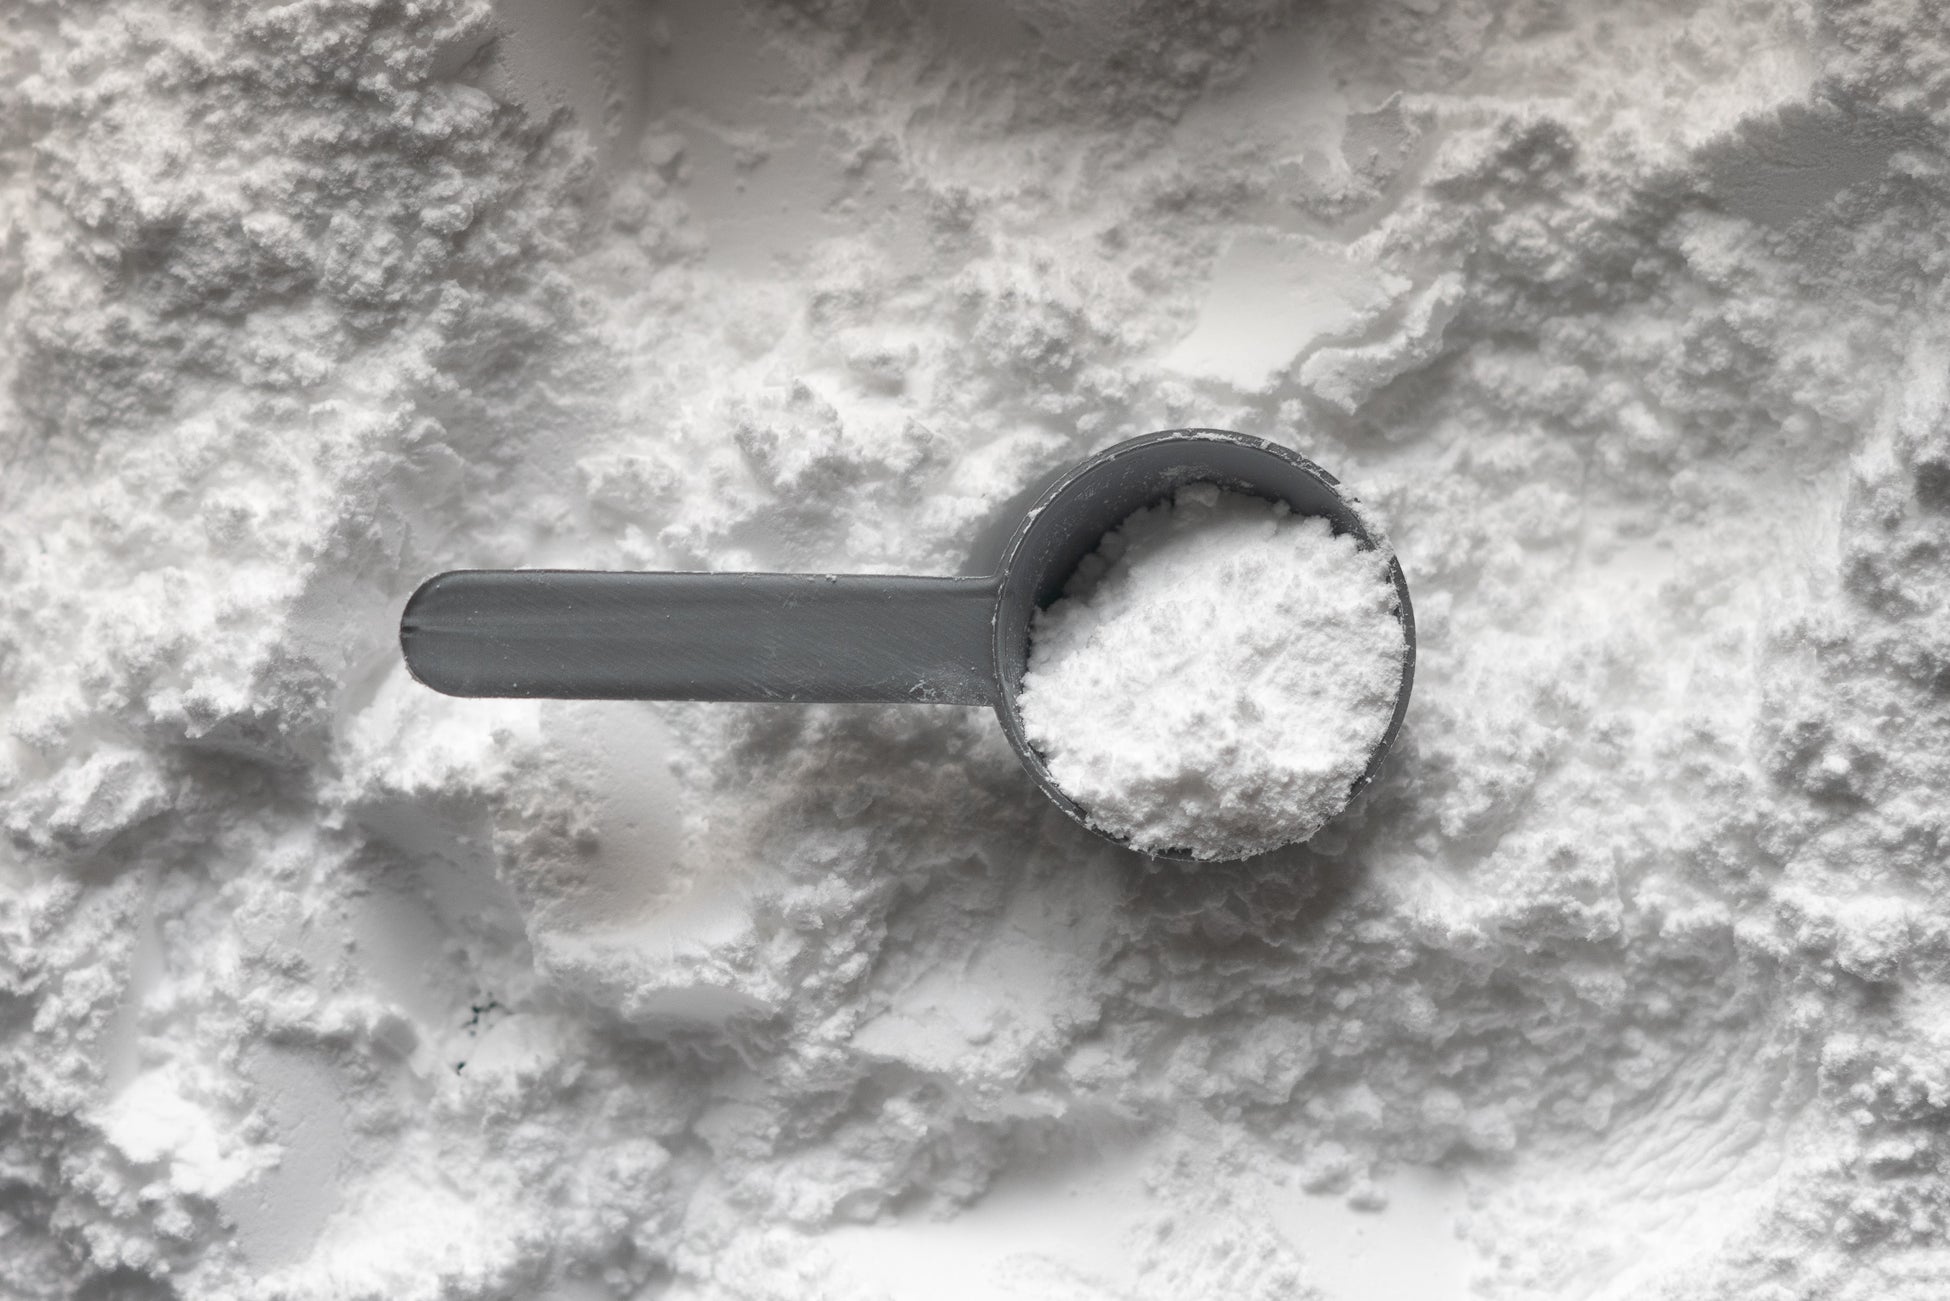 Half-filled ingredient measuring cup resting on a background on white powder.